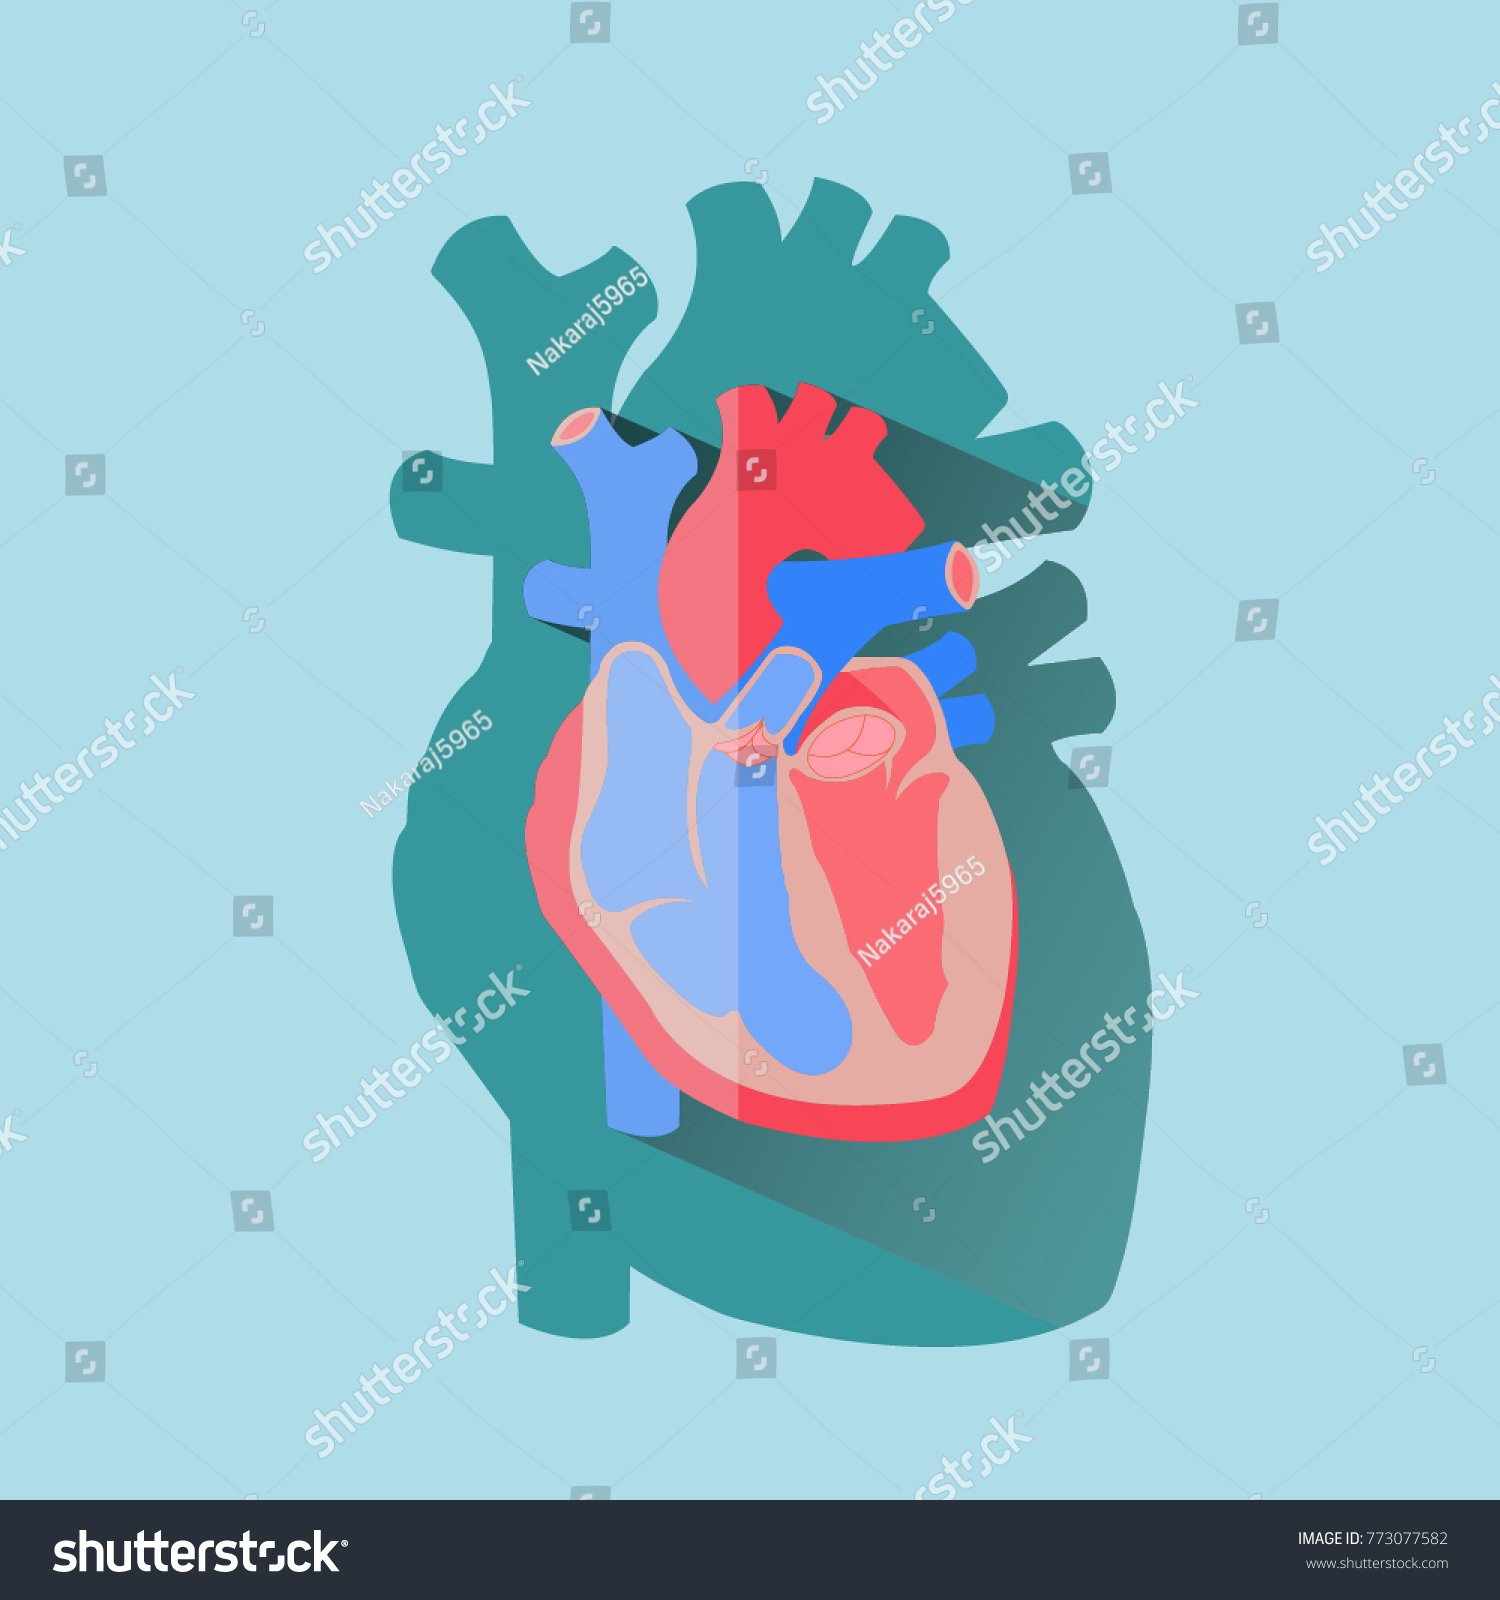 Human Heart Cross Section Anatomical Diagram Stock Vector (Royalty Free ...